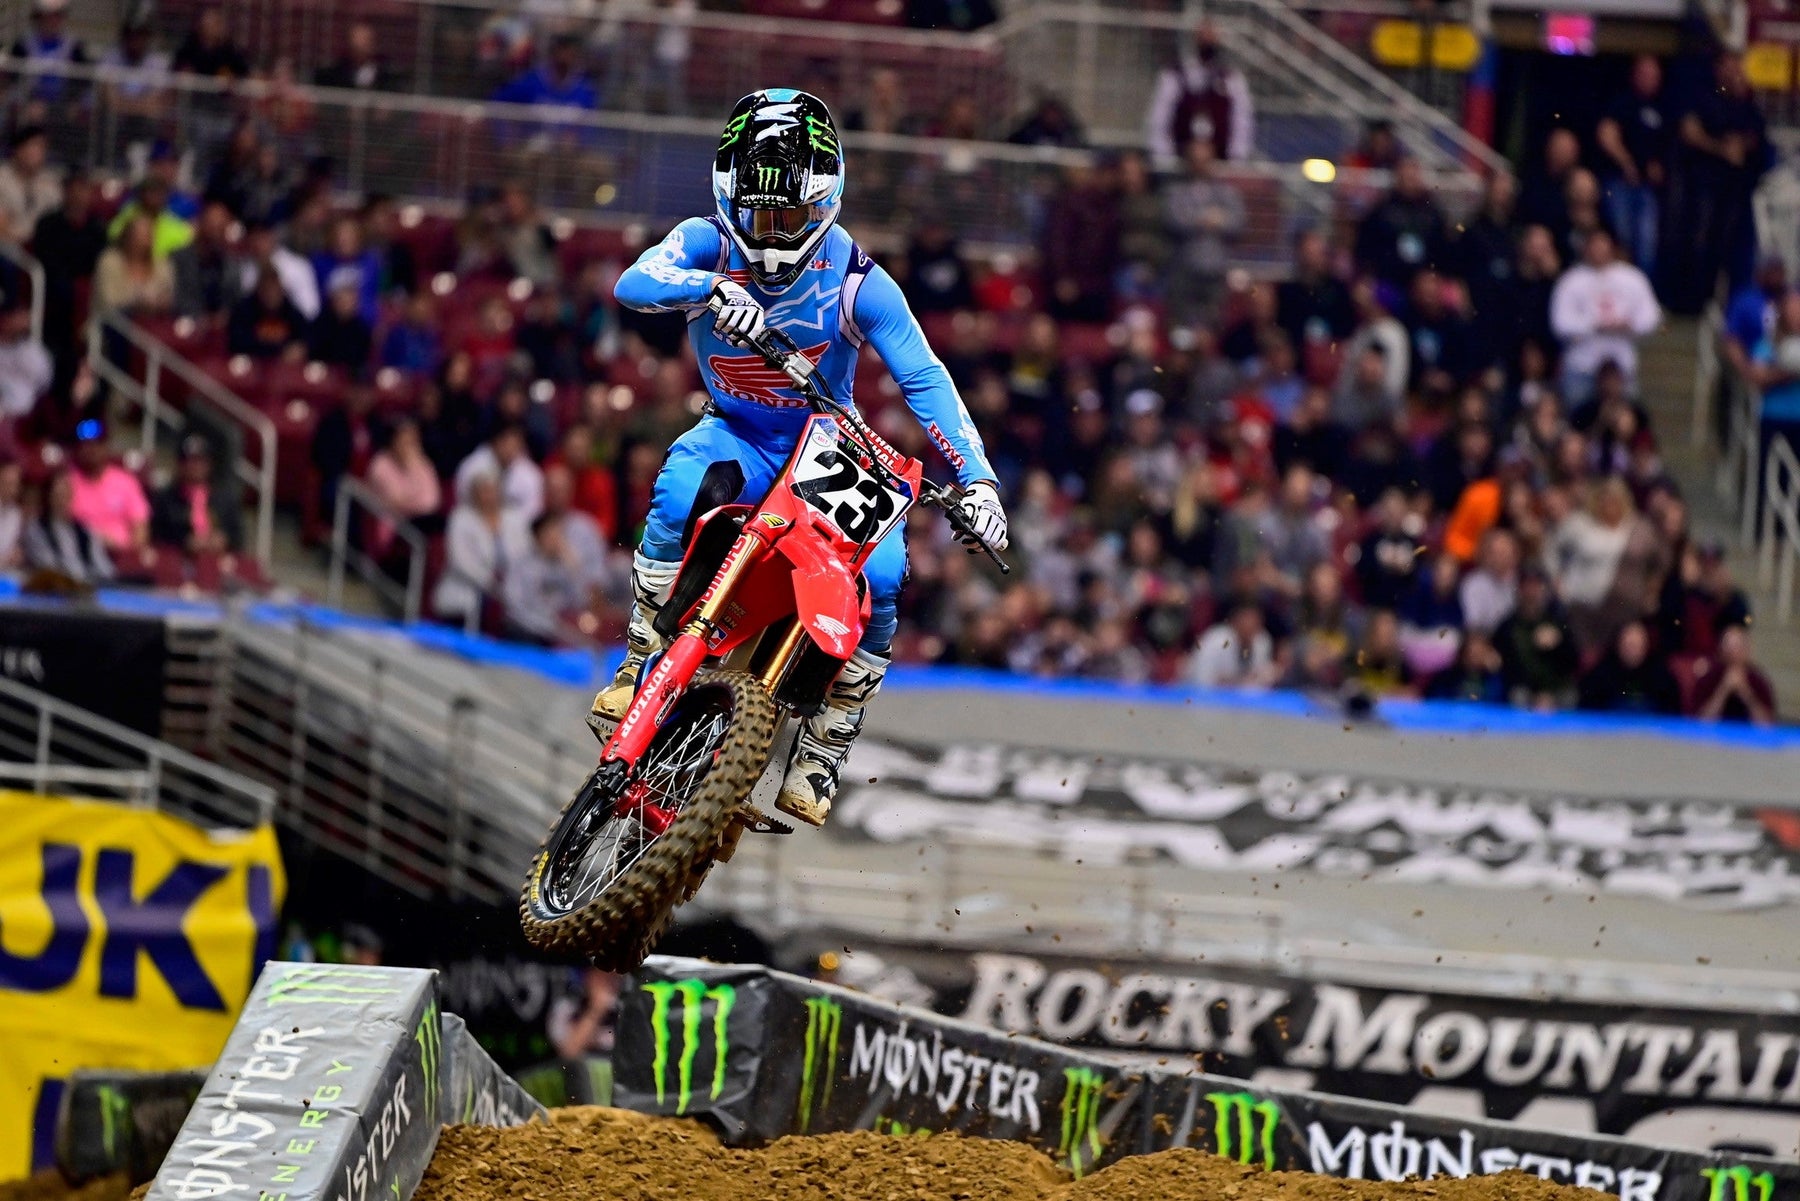 ALPINESTARS DOMINATE AMA 450SX TRIPLE-CROWN AS CHASE SEXTON, MARVIN MUSQUIN AND ELI TOMAC EACH TAKE RACE WINS IN ST LOUIS, MISSOURI